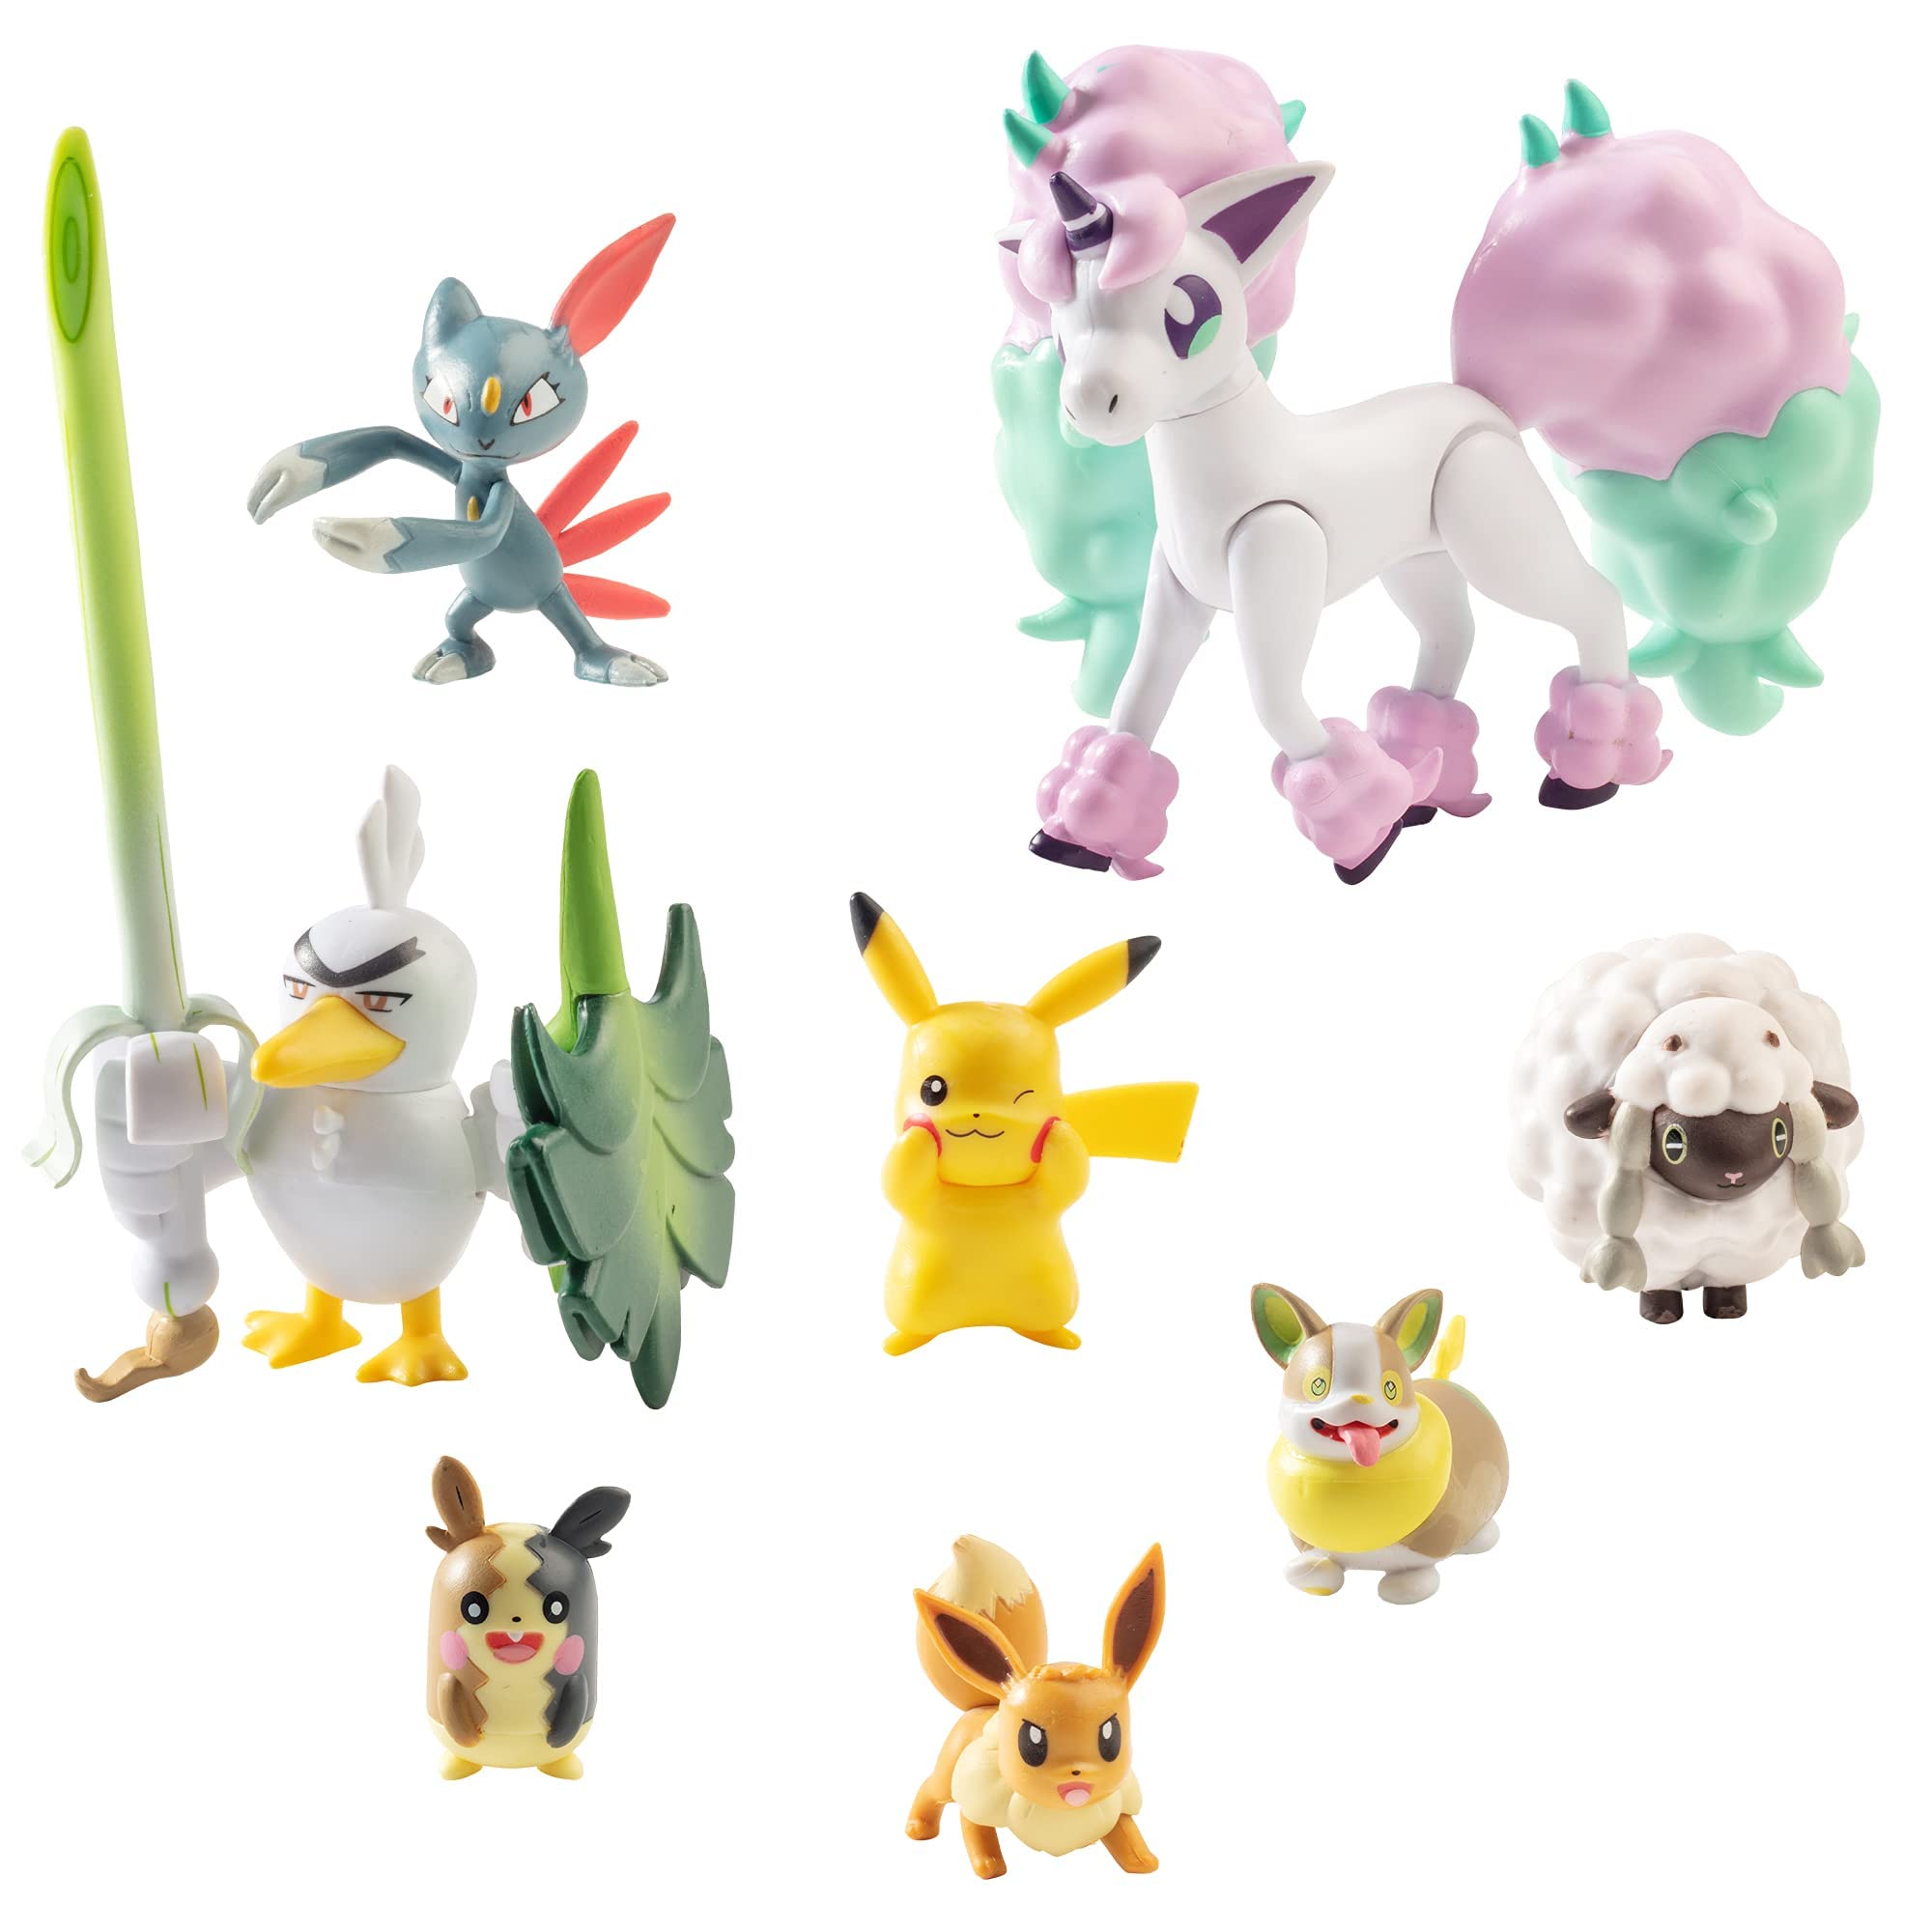 Pokémon Battle Figure Multi Pack Toy Set, 8 Pieces - Generation 8 - Includes Pikachu, Eevee, Wooloo, Sneasel, Yamper, Ponyta, Sirfetch'd & Morpeko - Gift for Kids, Ages 4+